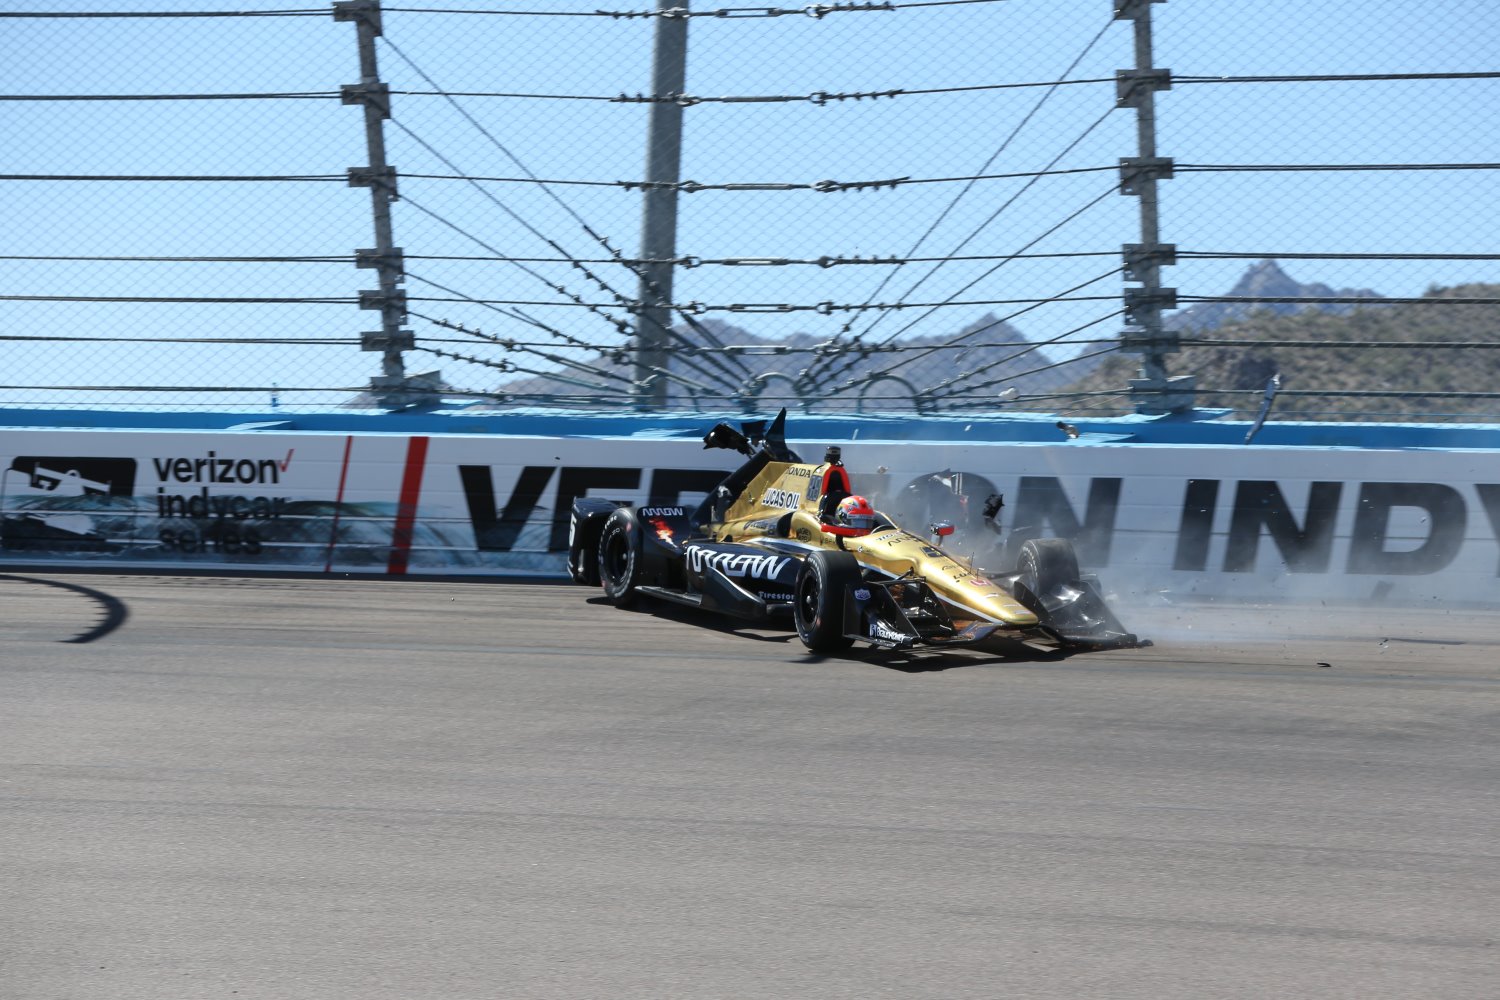 The weekend started off bad for Hinchcliffe, with his car careening off the Turn 1 wall